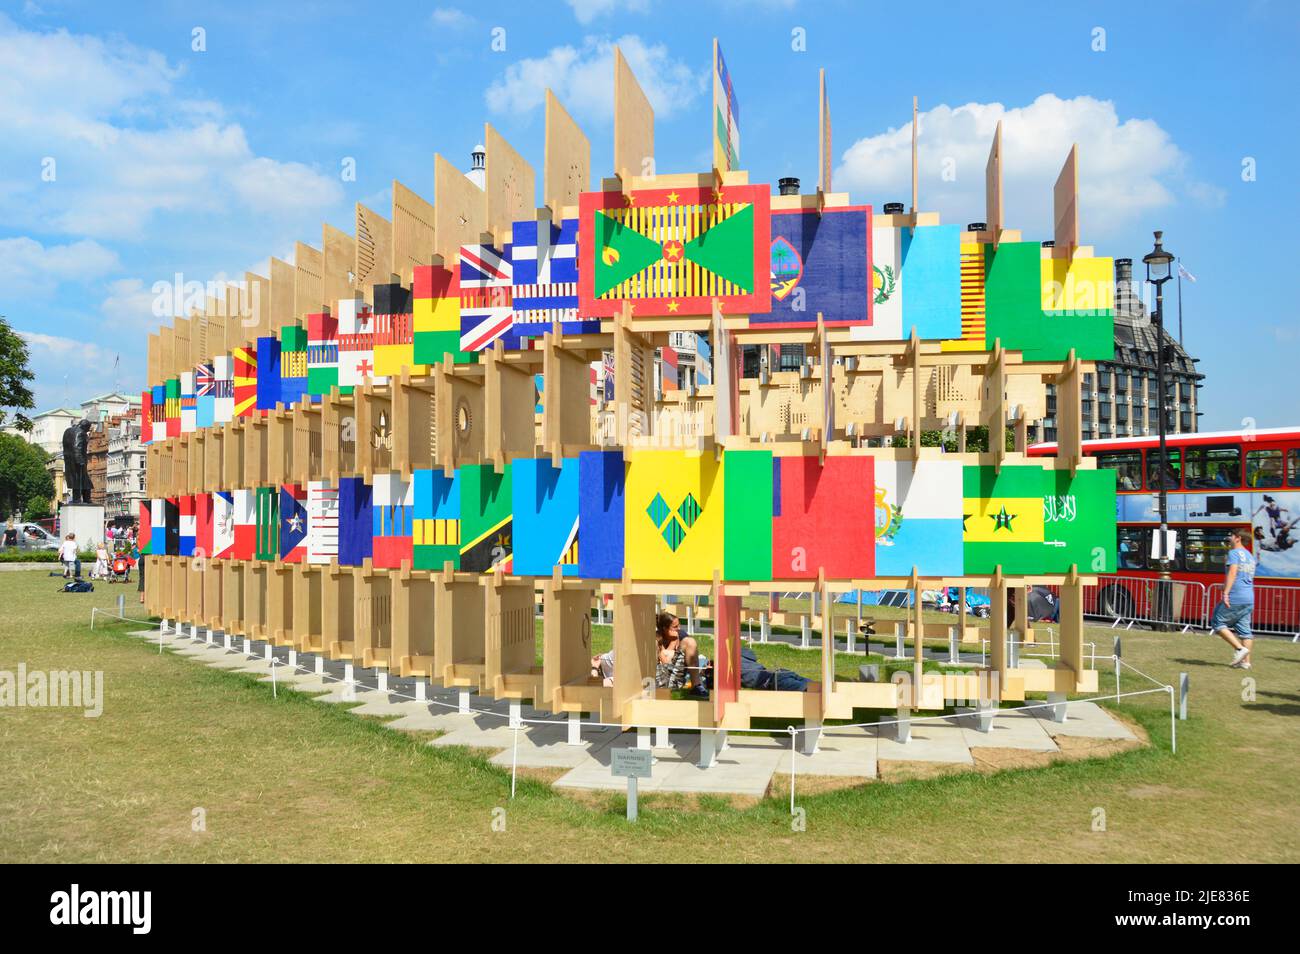 Plywood & timber purpose built structure displaying graphic flags from some of 2012 Olympics competing nations in Parliament Square London England UK Stock Photo